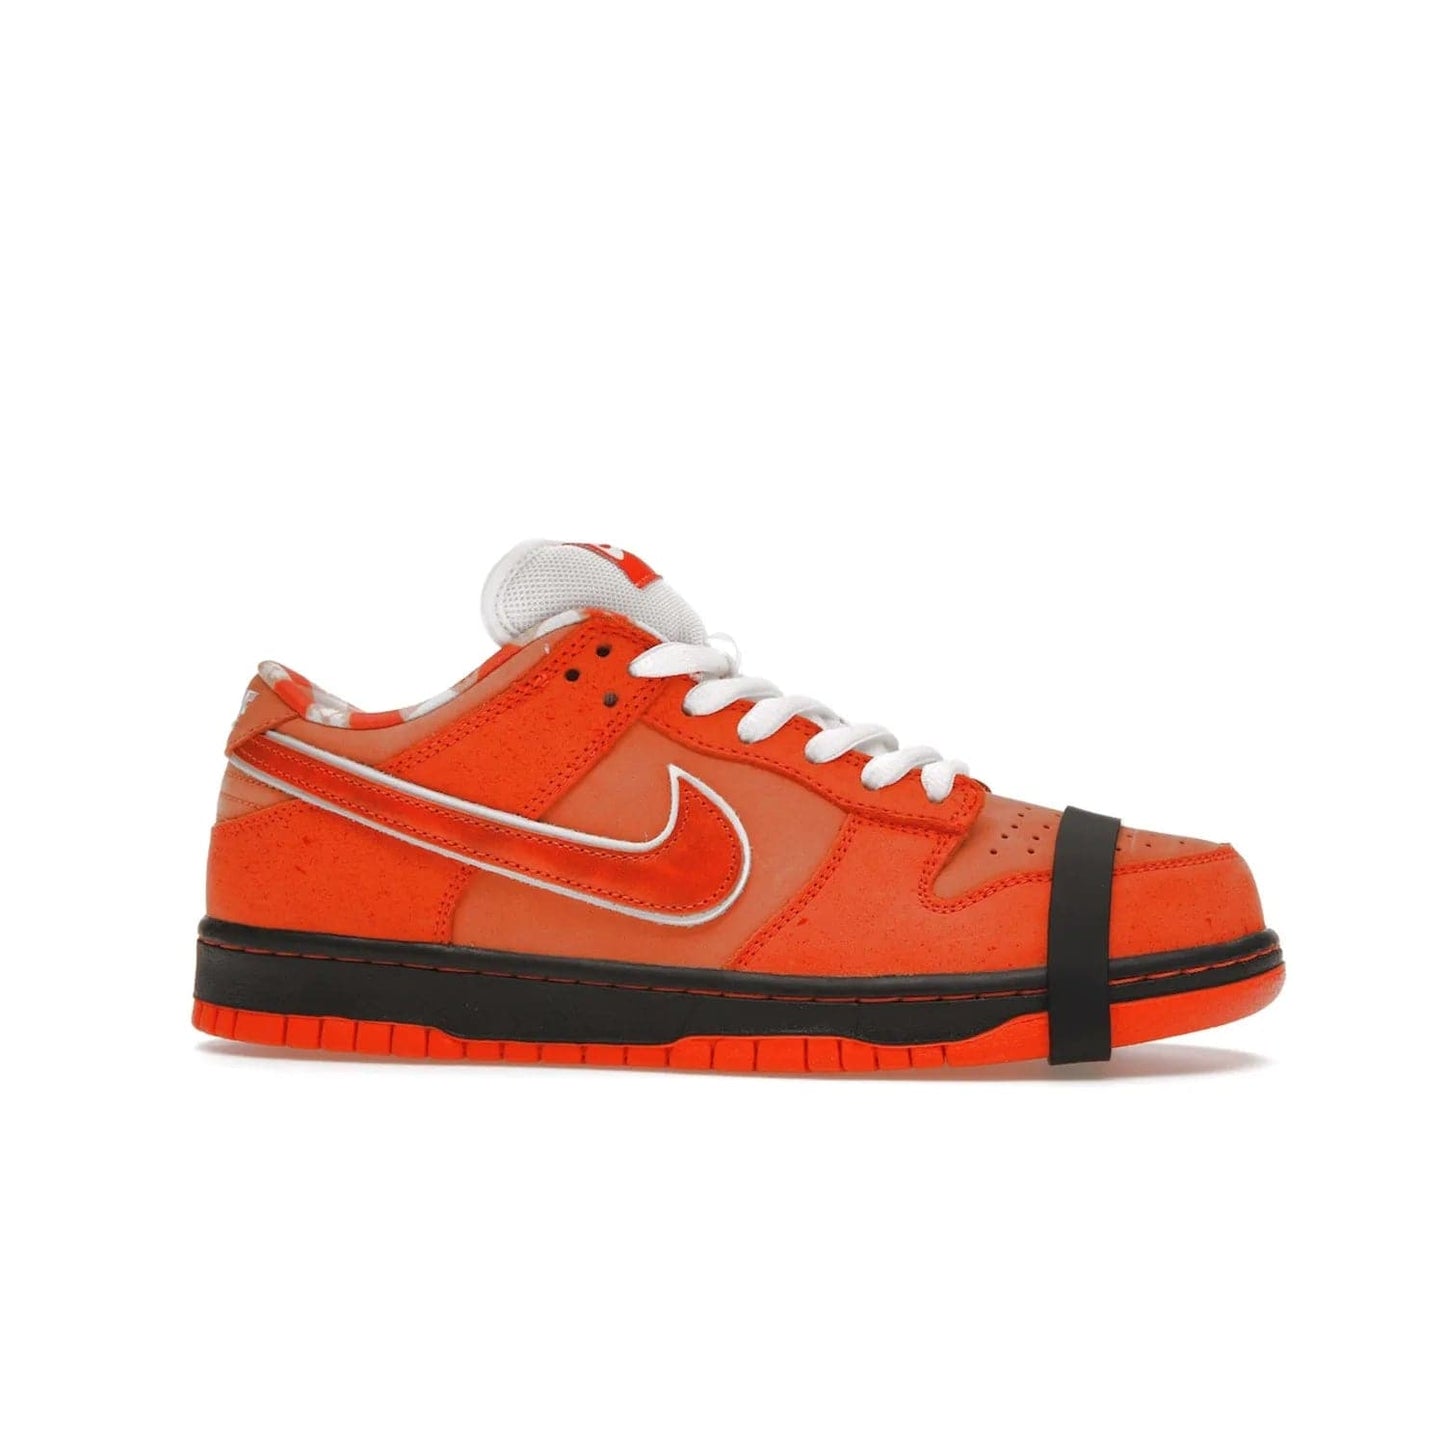 Nike SB Dunk Low Concepts Orange Lobster - Image 2 - Only at www.BallersClubKickz.com - Limited Nike SB Dunk Low Concepts Orange Lobster features premium nubuck upper with vibrant oranges for eye-catching colorblocked design. Signature Nike SB tag and bib-inspired interior for added texture. Outsole and cupsole provide extra reinforcement. Get it 12/20/2022.